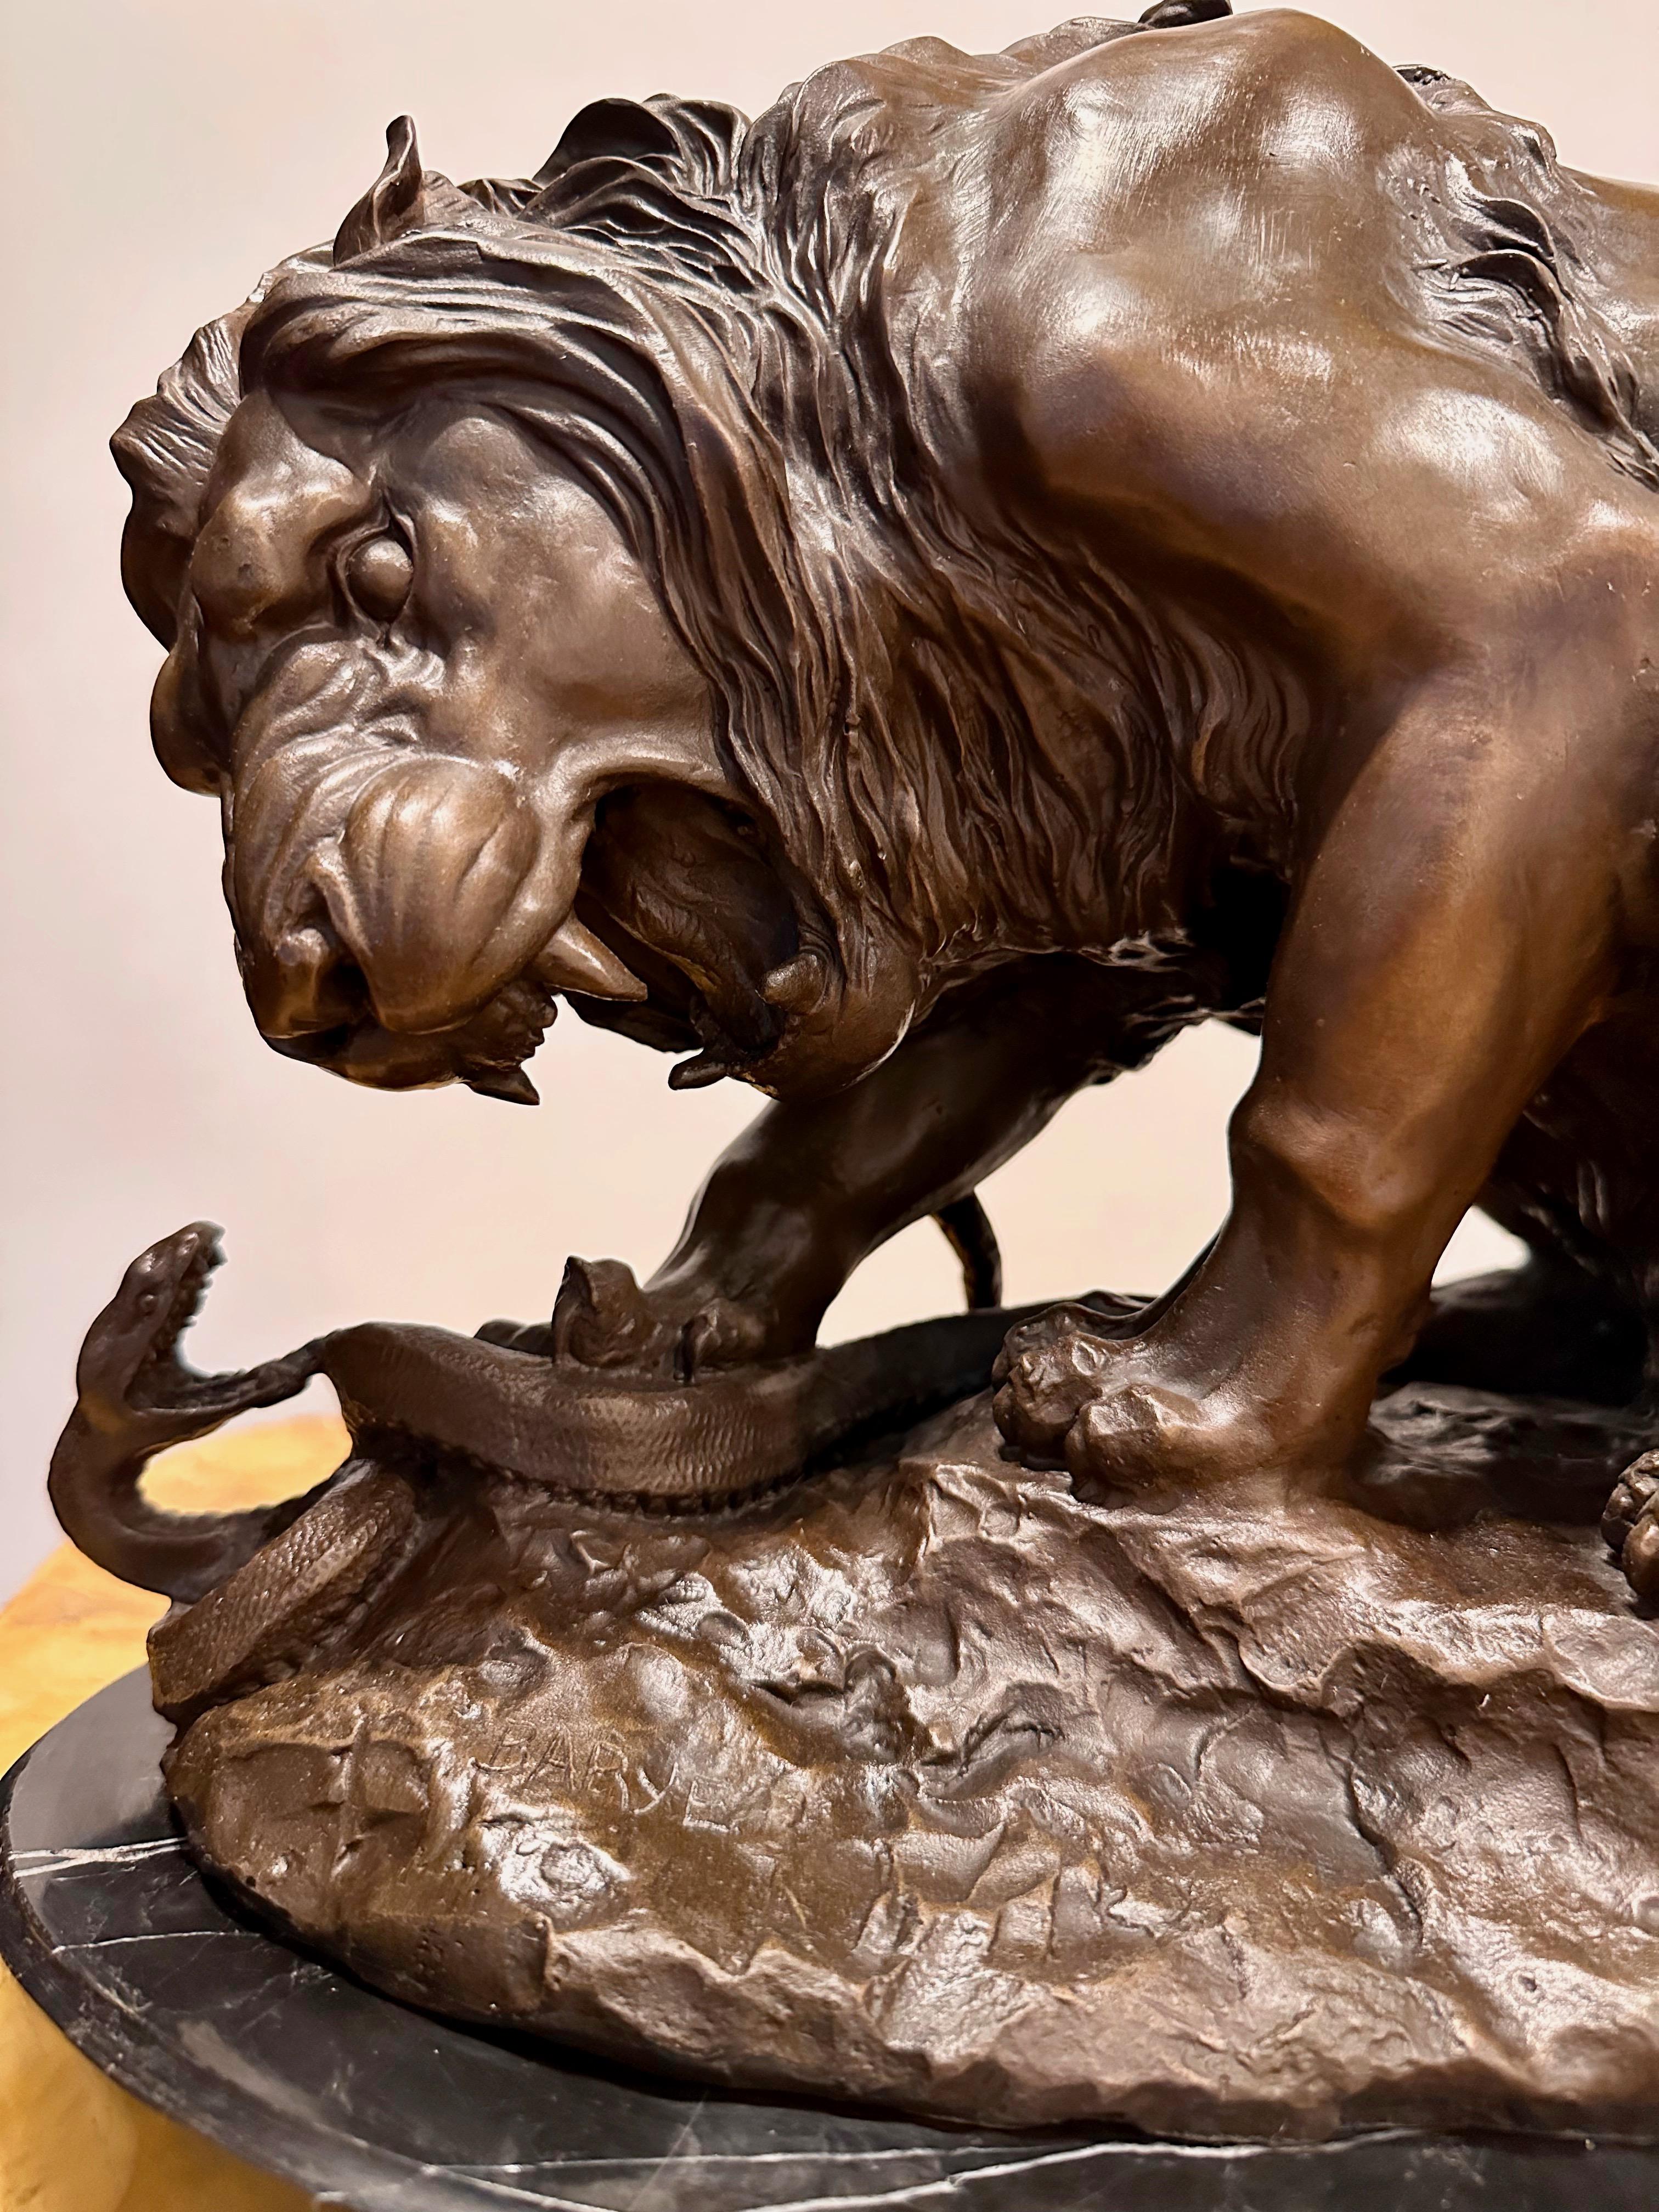 Antoine-Louis Barye (Paris, 1795-1875). Lion crushing a Snake. Bronze with a brown patina signed Barye on the left hand side of the base. The bronze sculpture is sitting on a black marble base.

This spectacular bronze representing the 